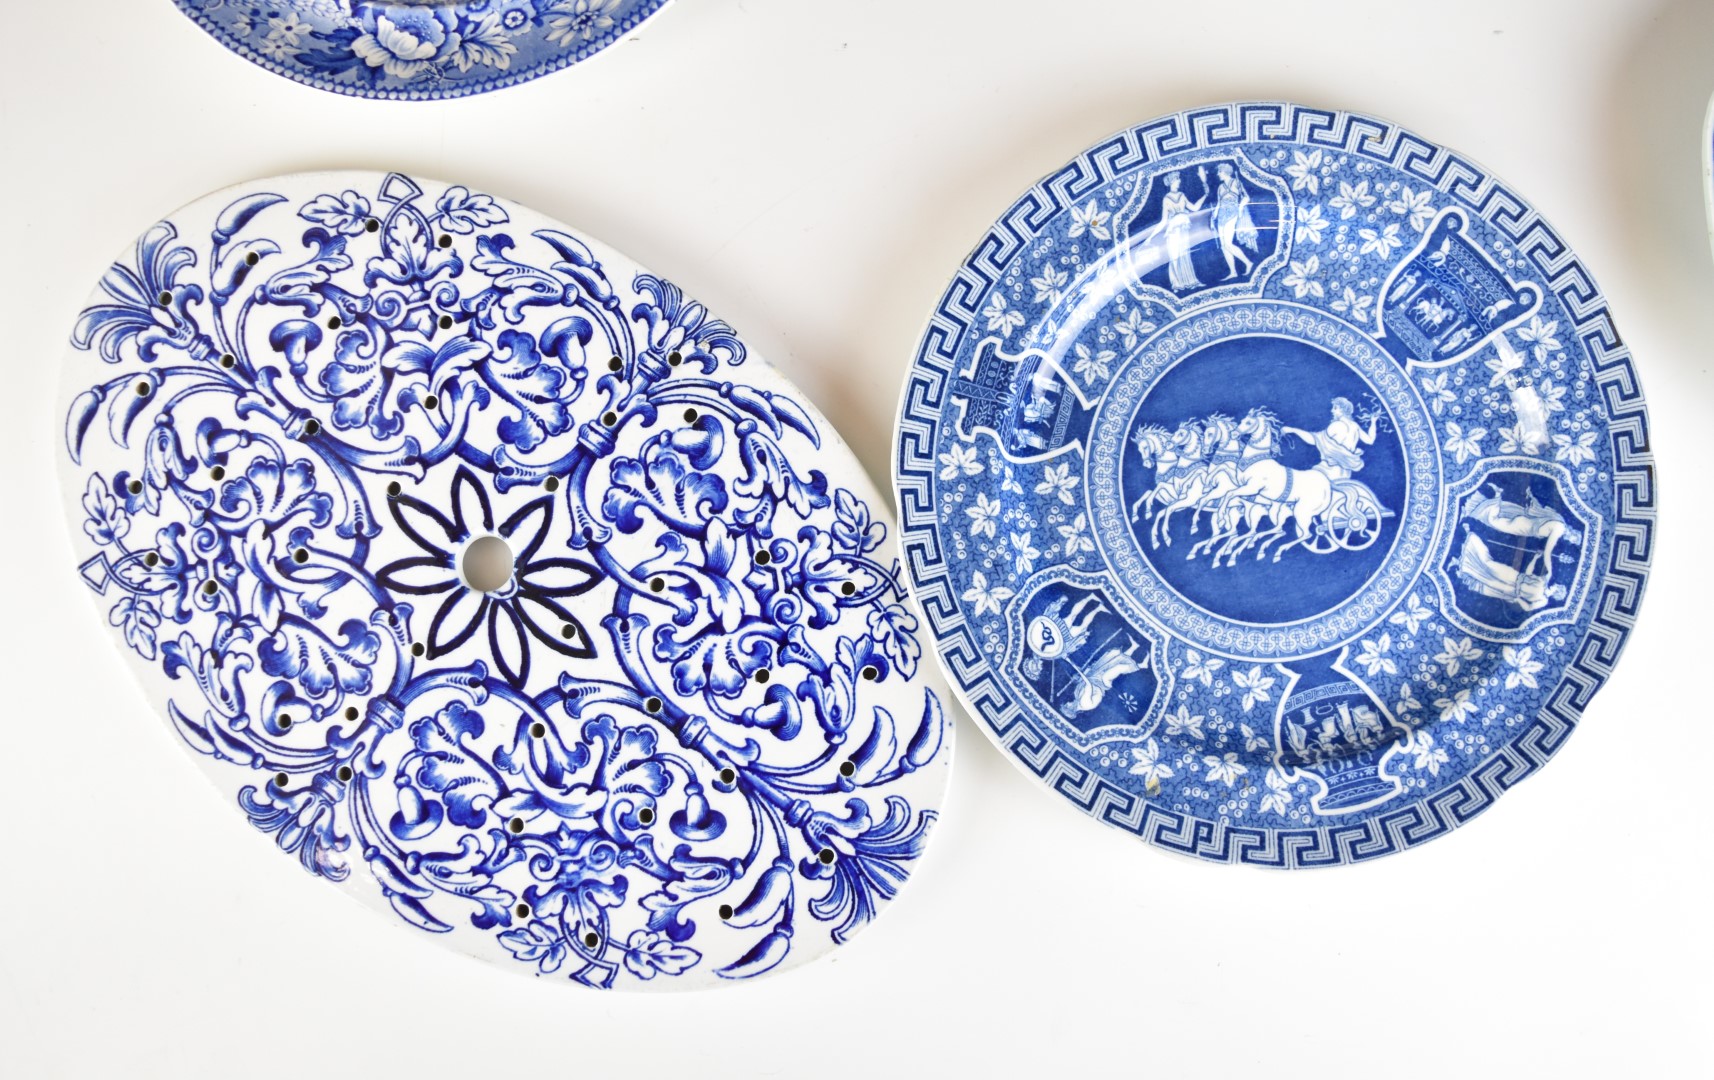 19thC blue and white English and Chinese porcelain / ceramics including Chinese export dish, - Image 6 of 10